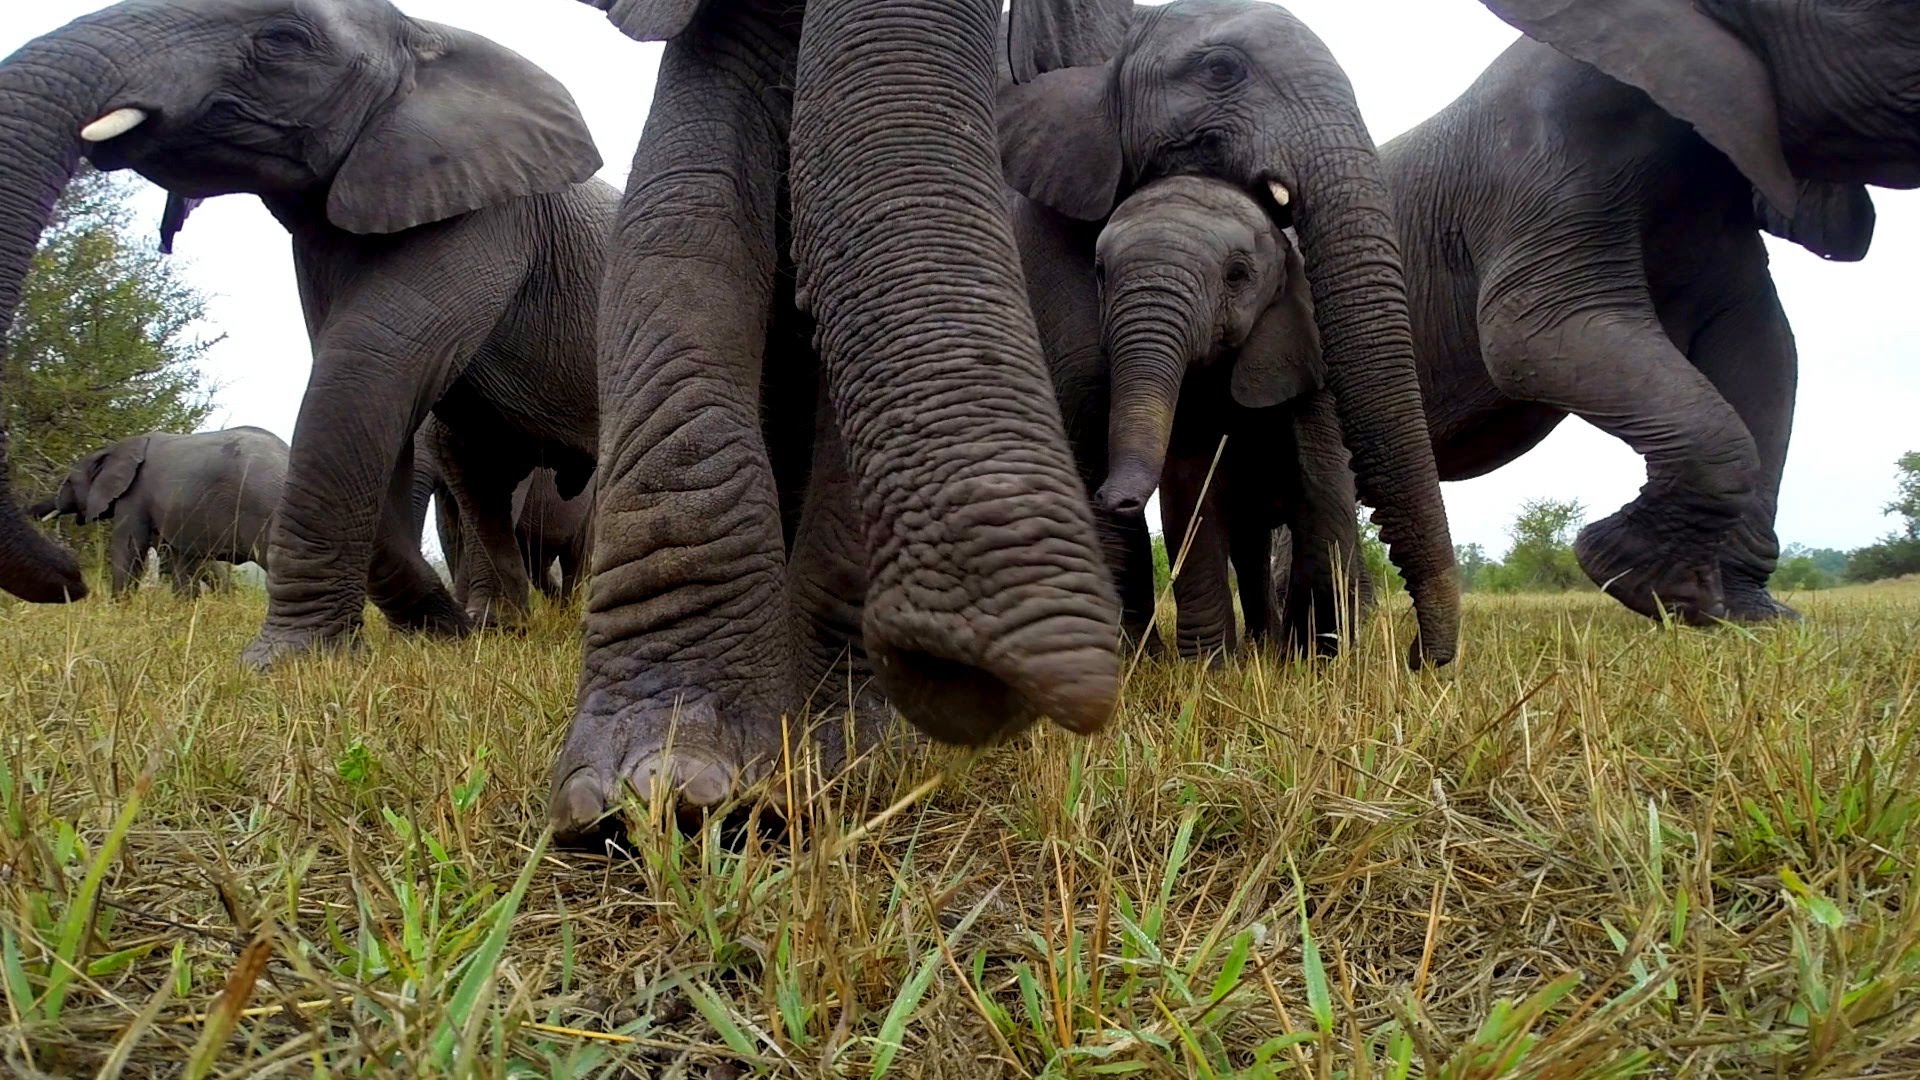 A herd of elephants who were grazing in a grassy field with their little ba...